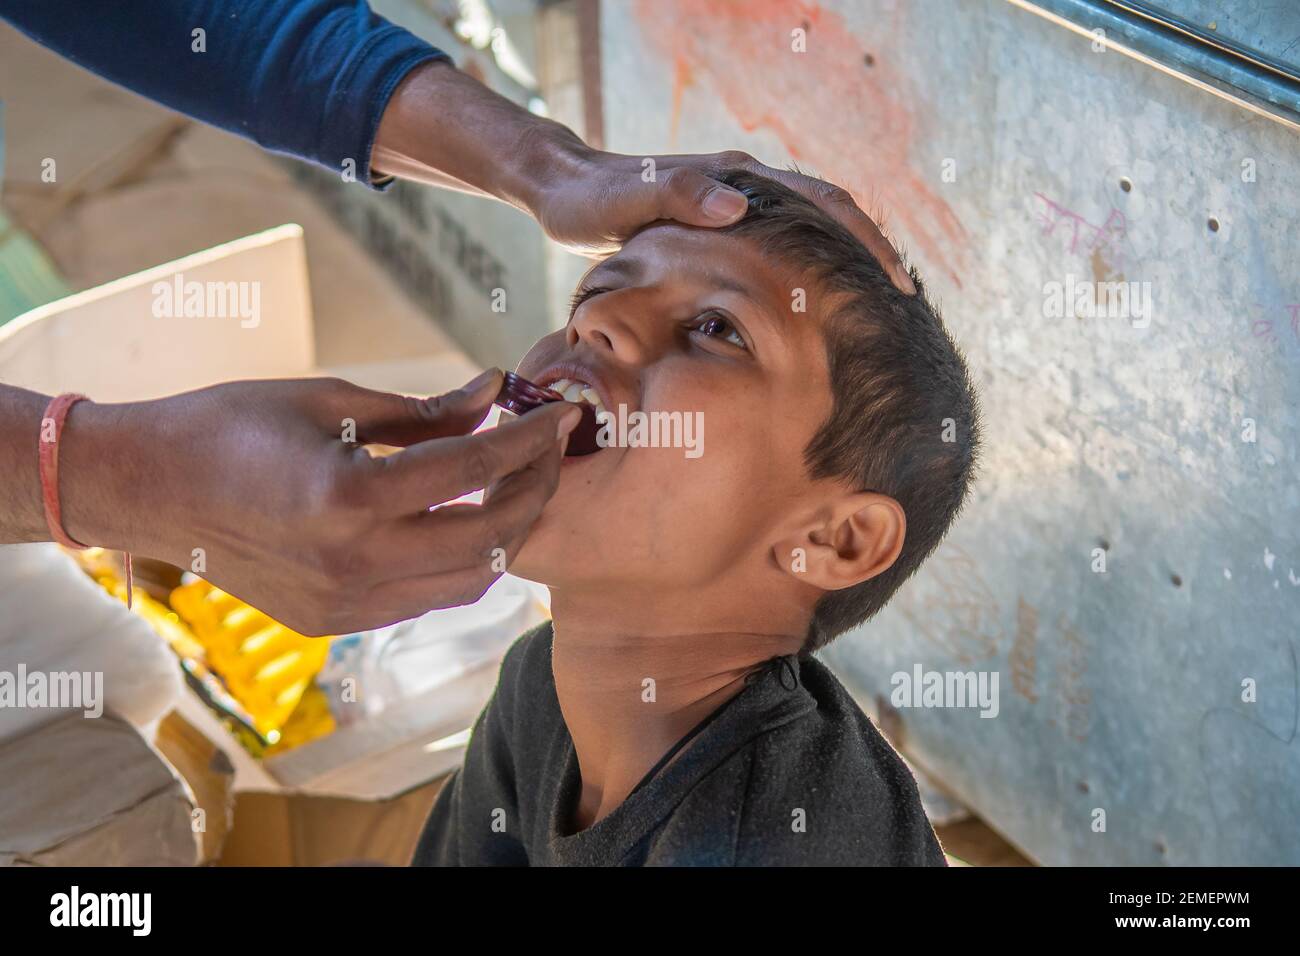 Rajasthan. India. 07-02-2018. Children receiving medical attention from a doctor at school in a village in the Rajasthan. Stock Photo